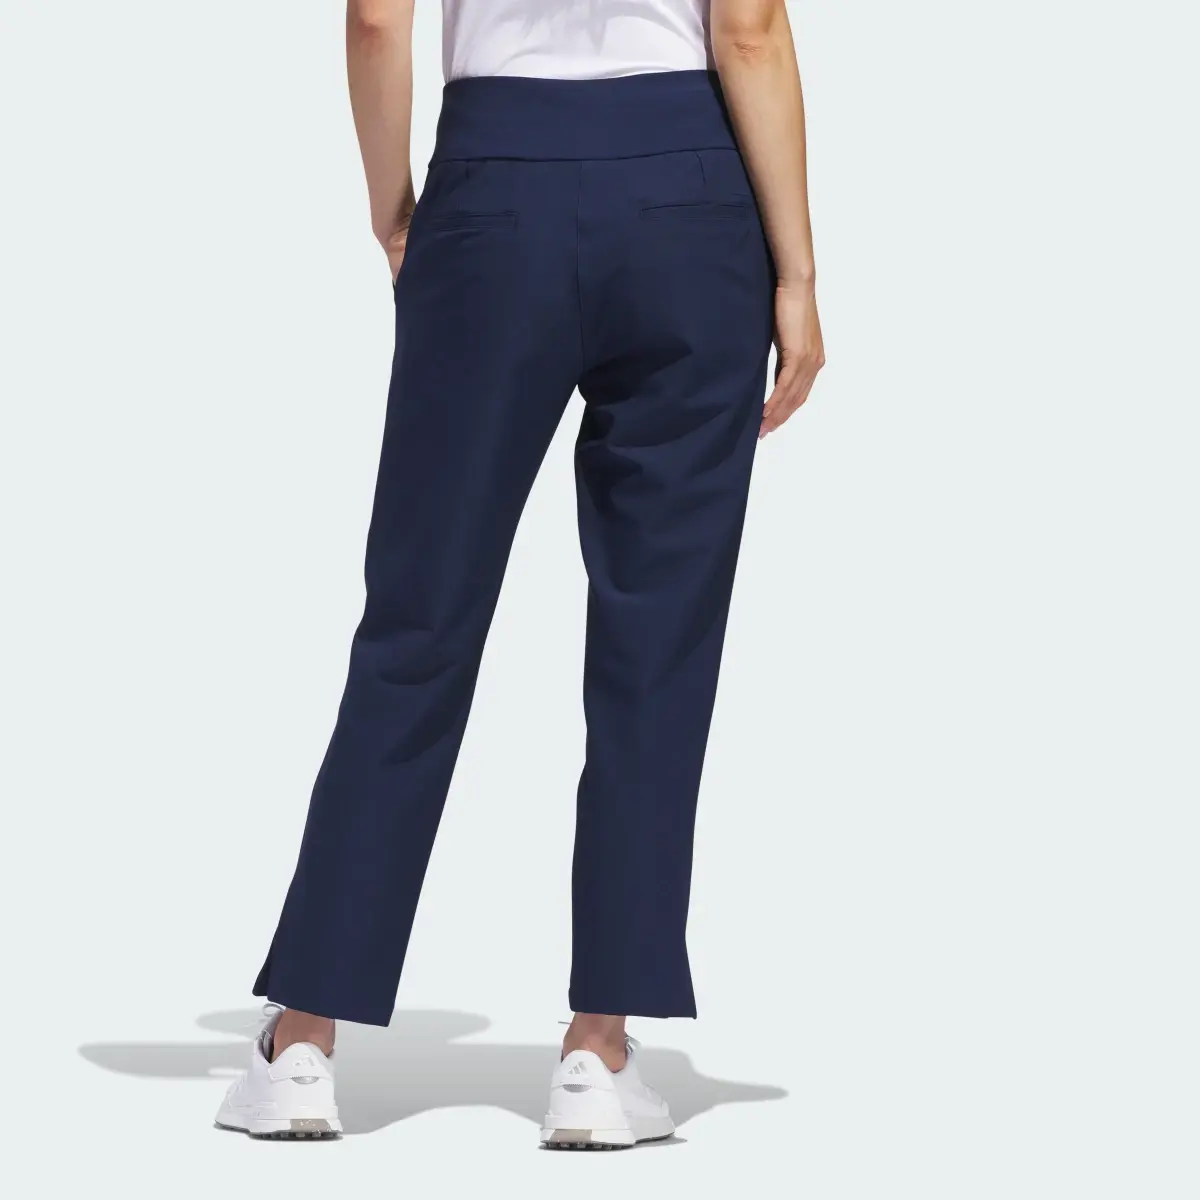 Adidas Ultimate365 Solid Ankle Trousers. 2